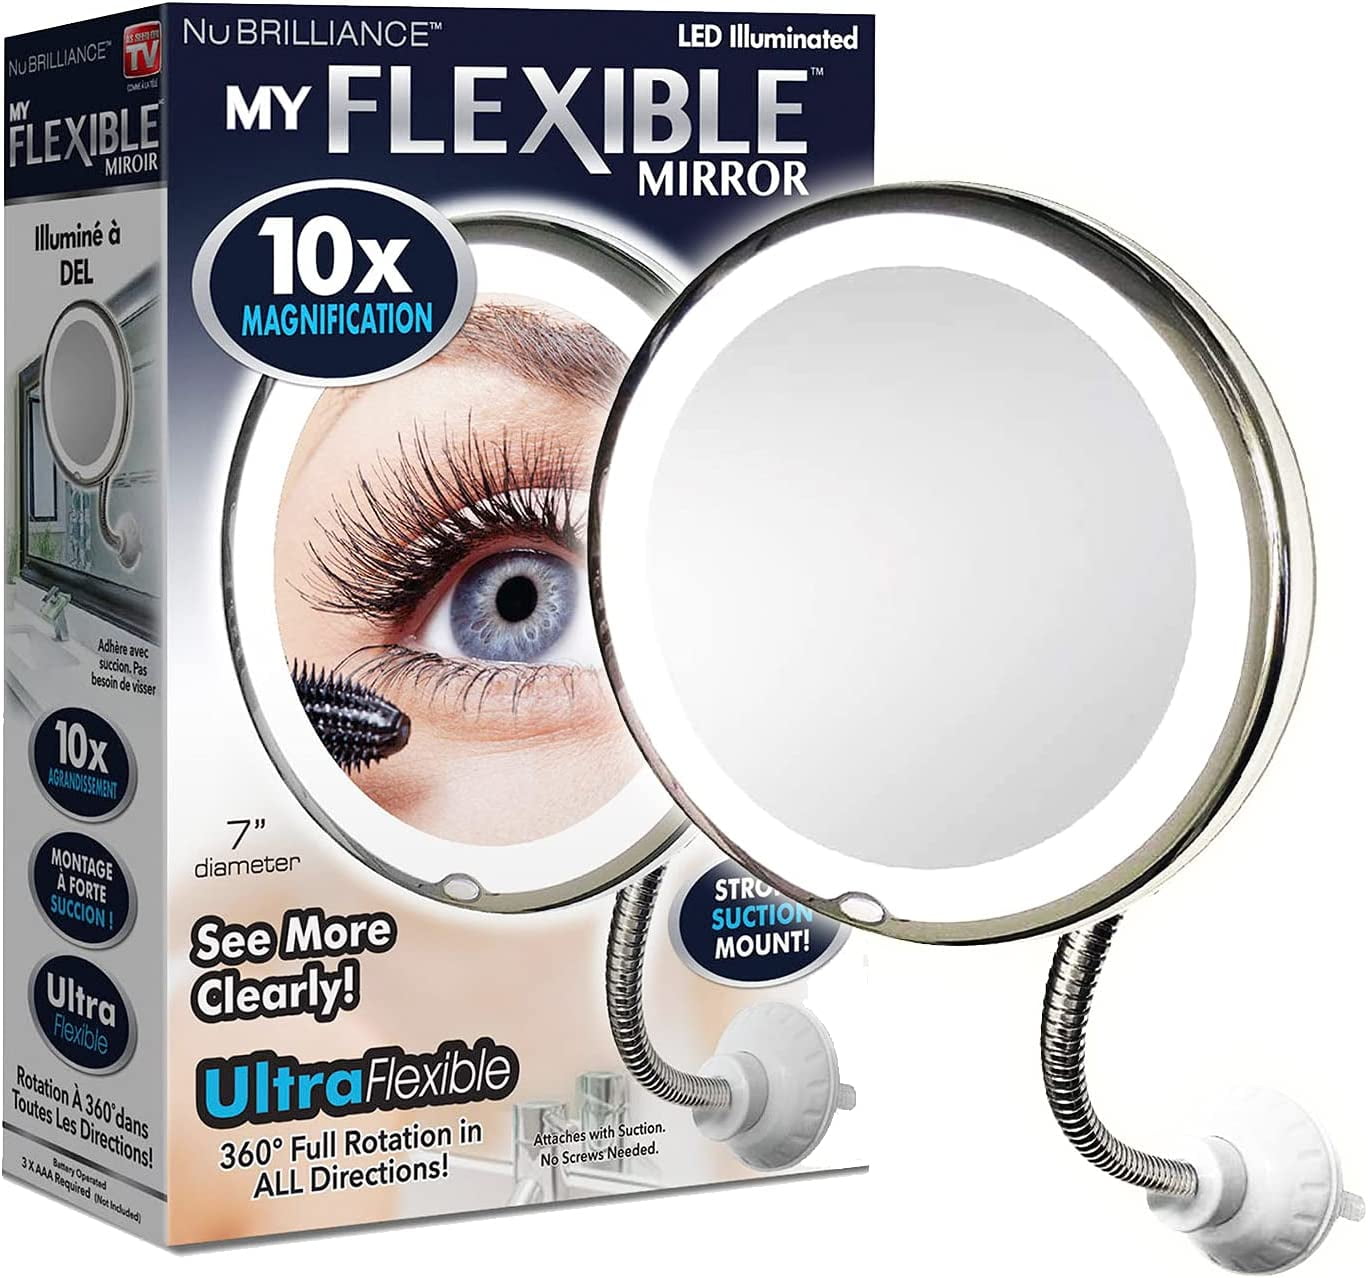 My Flexible Mirror Deluxe 10x Magnification 8” Make Up Round Vanity Mirror for Home, Bathroom Use with Super Strong Suction Cups As Seen on TV